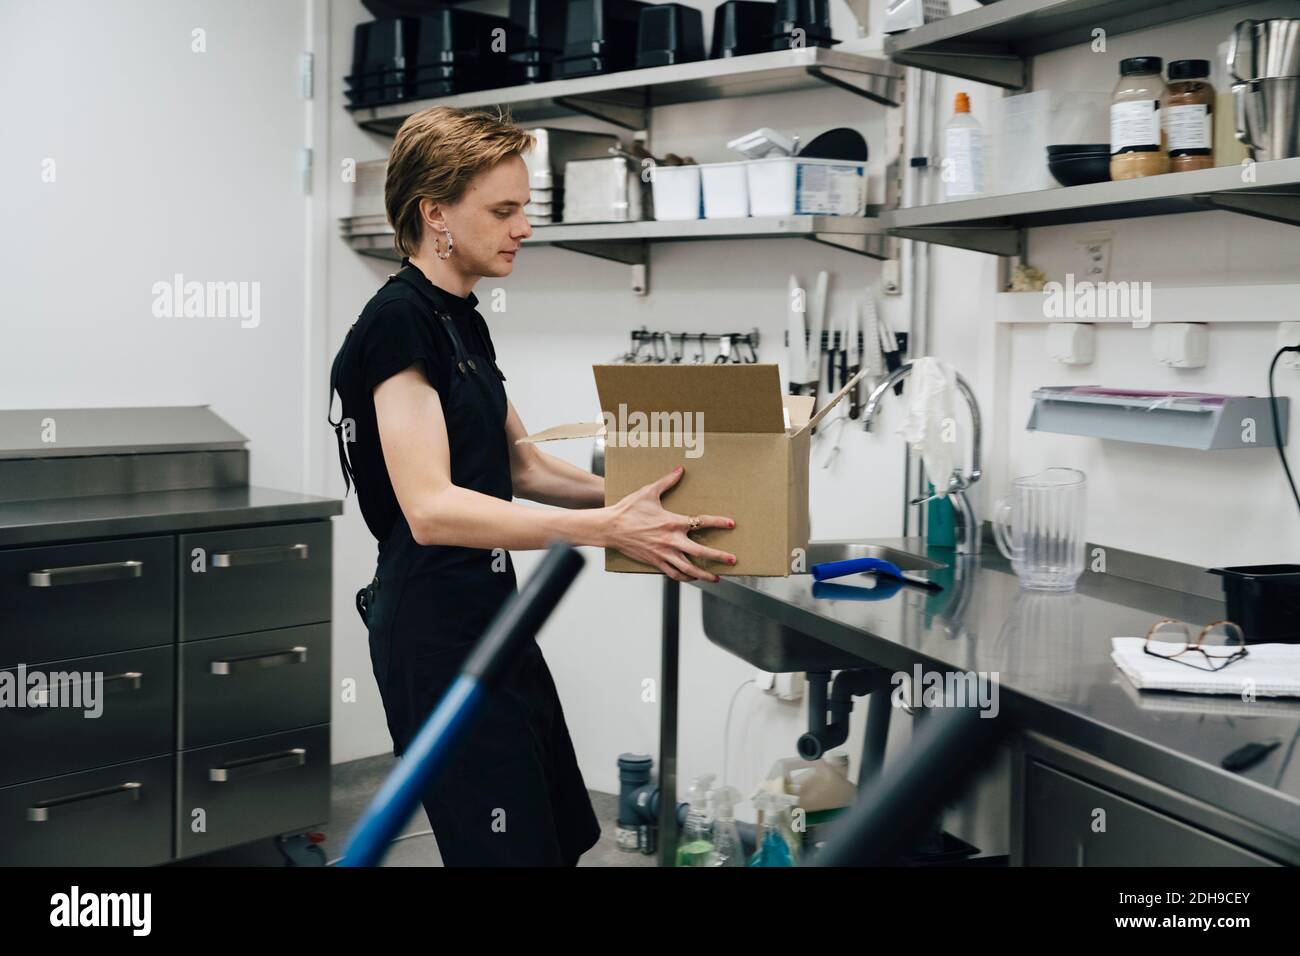 Side view of androgynous owner holding cardboard box in cafe kitchen Stock Photo